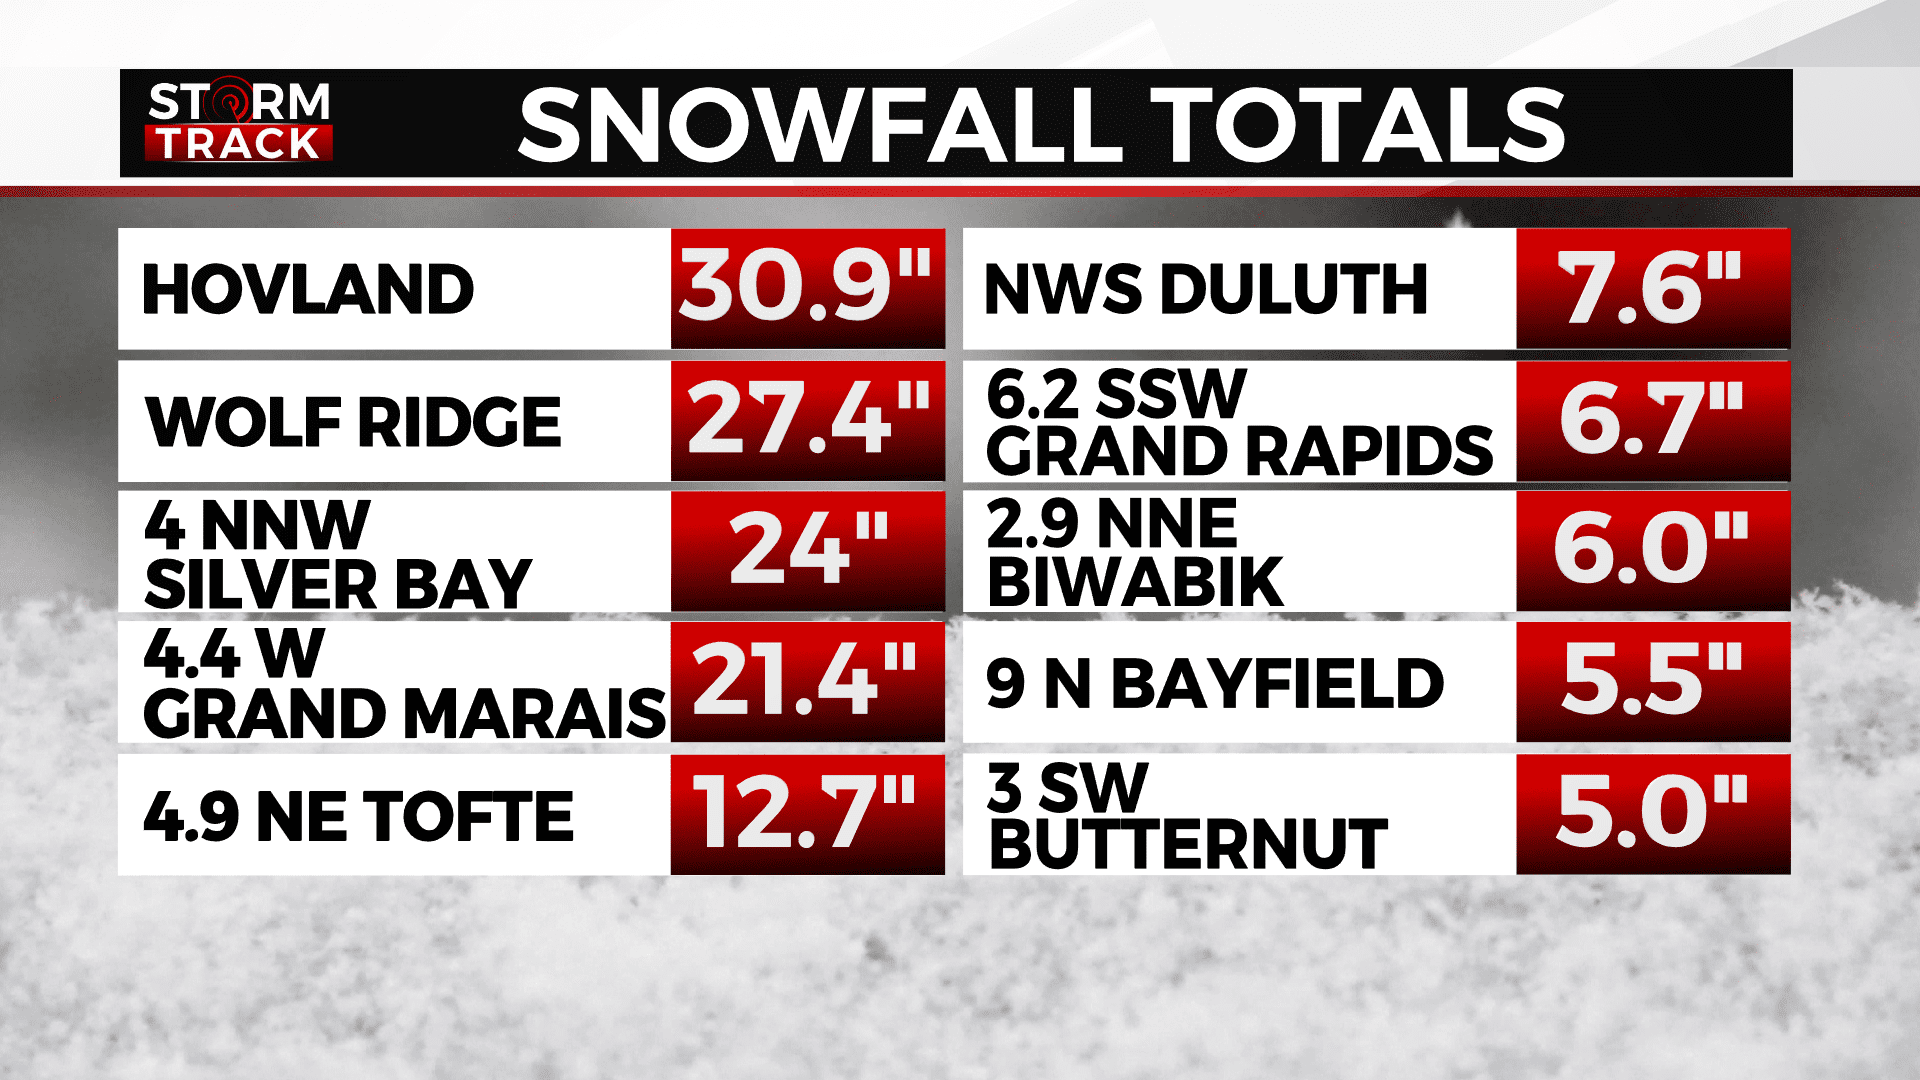 Snow reports as of 9 am November 17